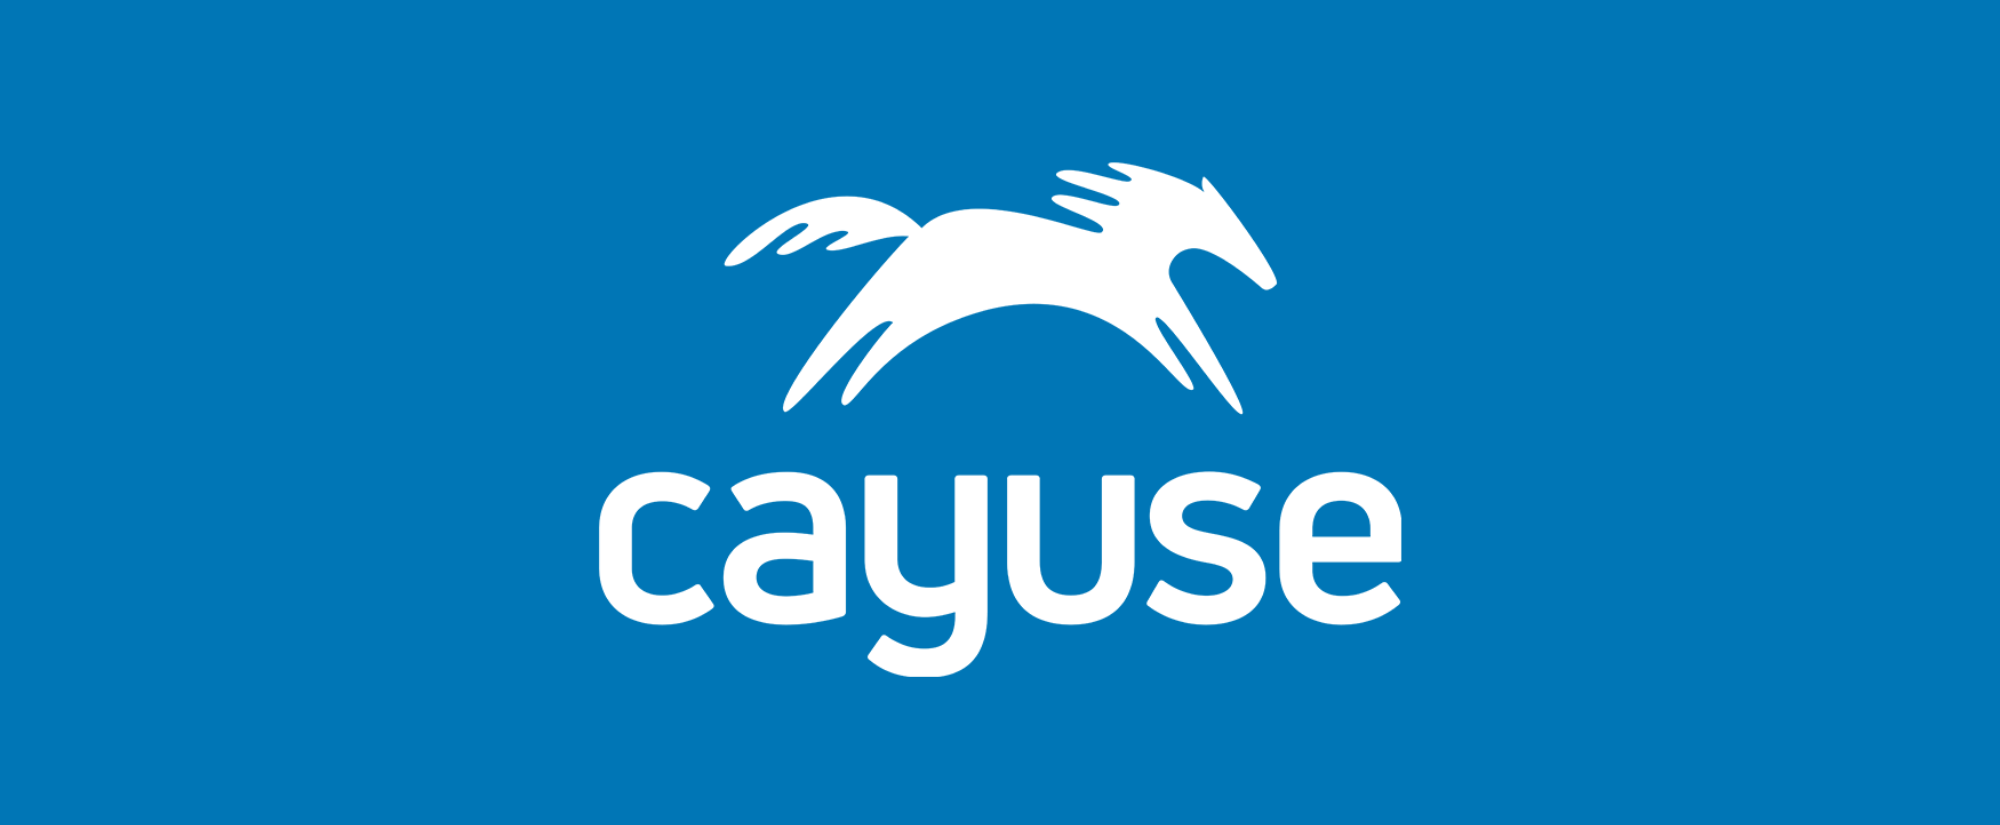 A banner consisting of Cayuse logo